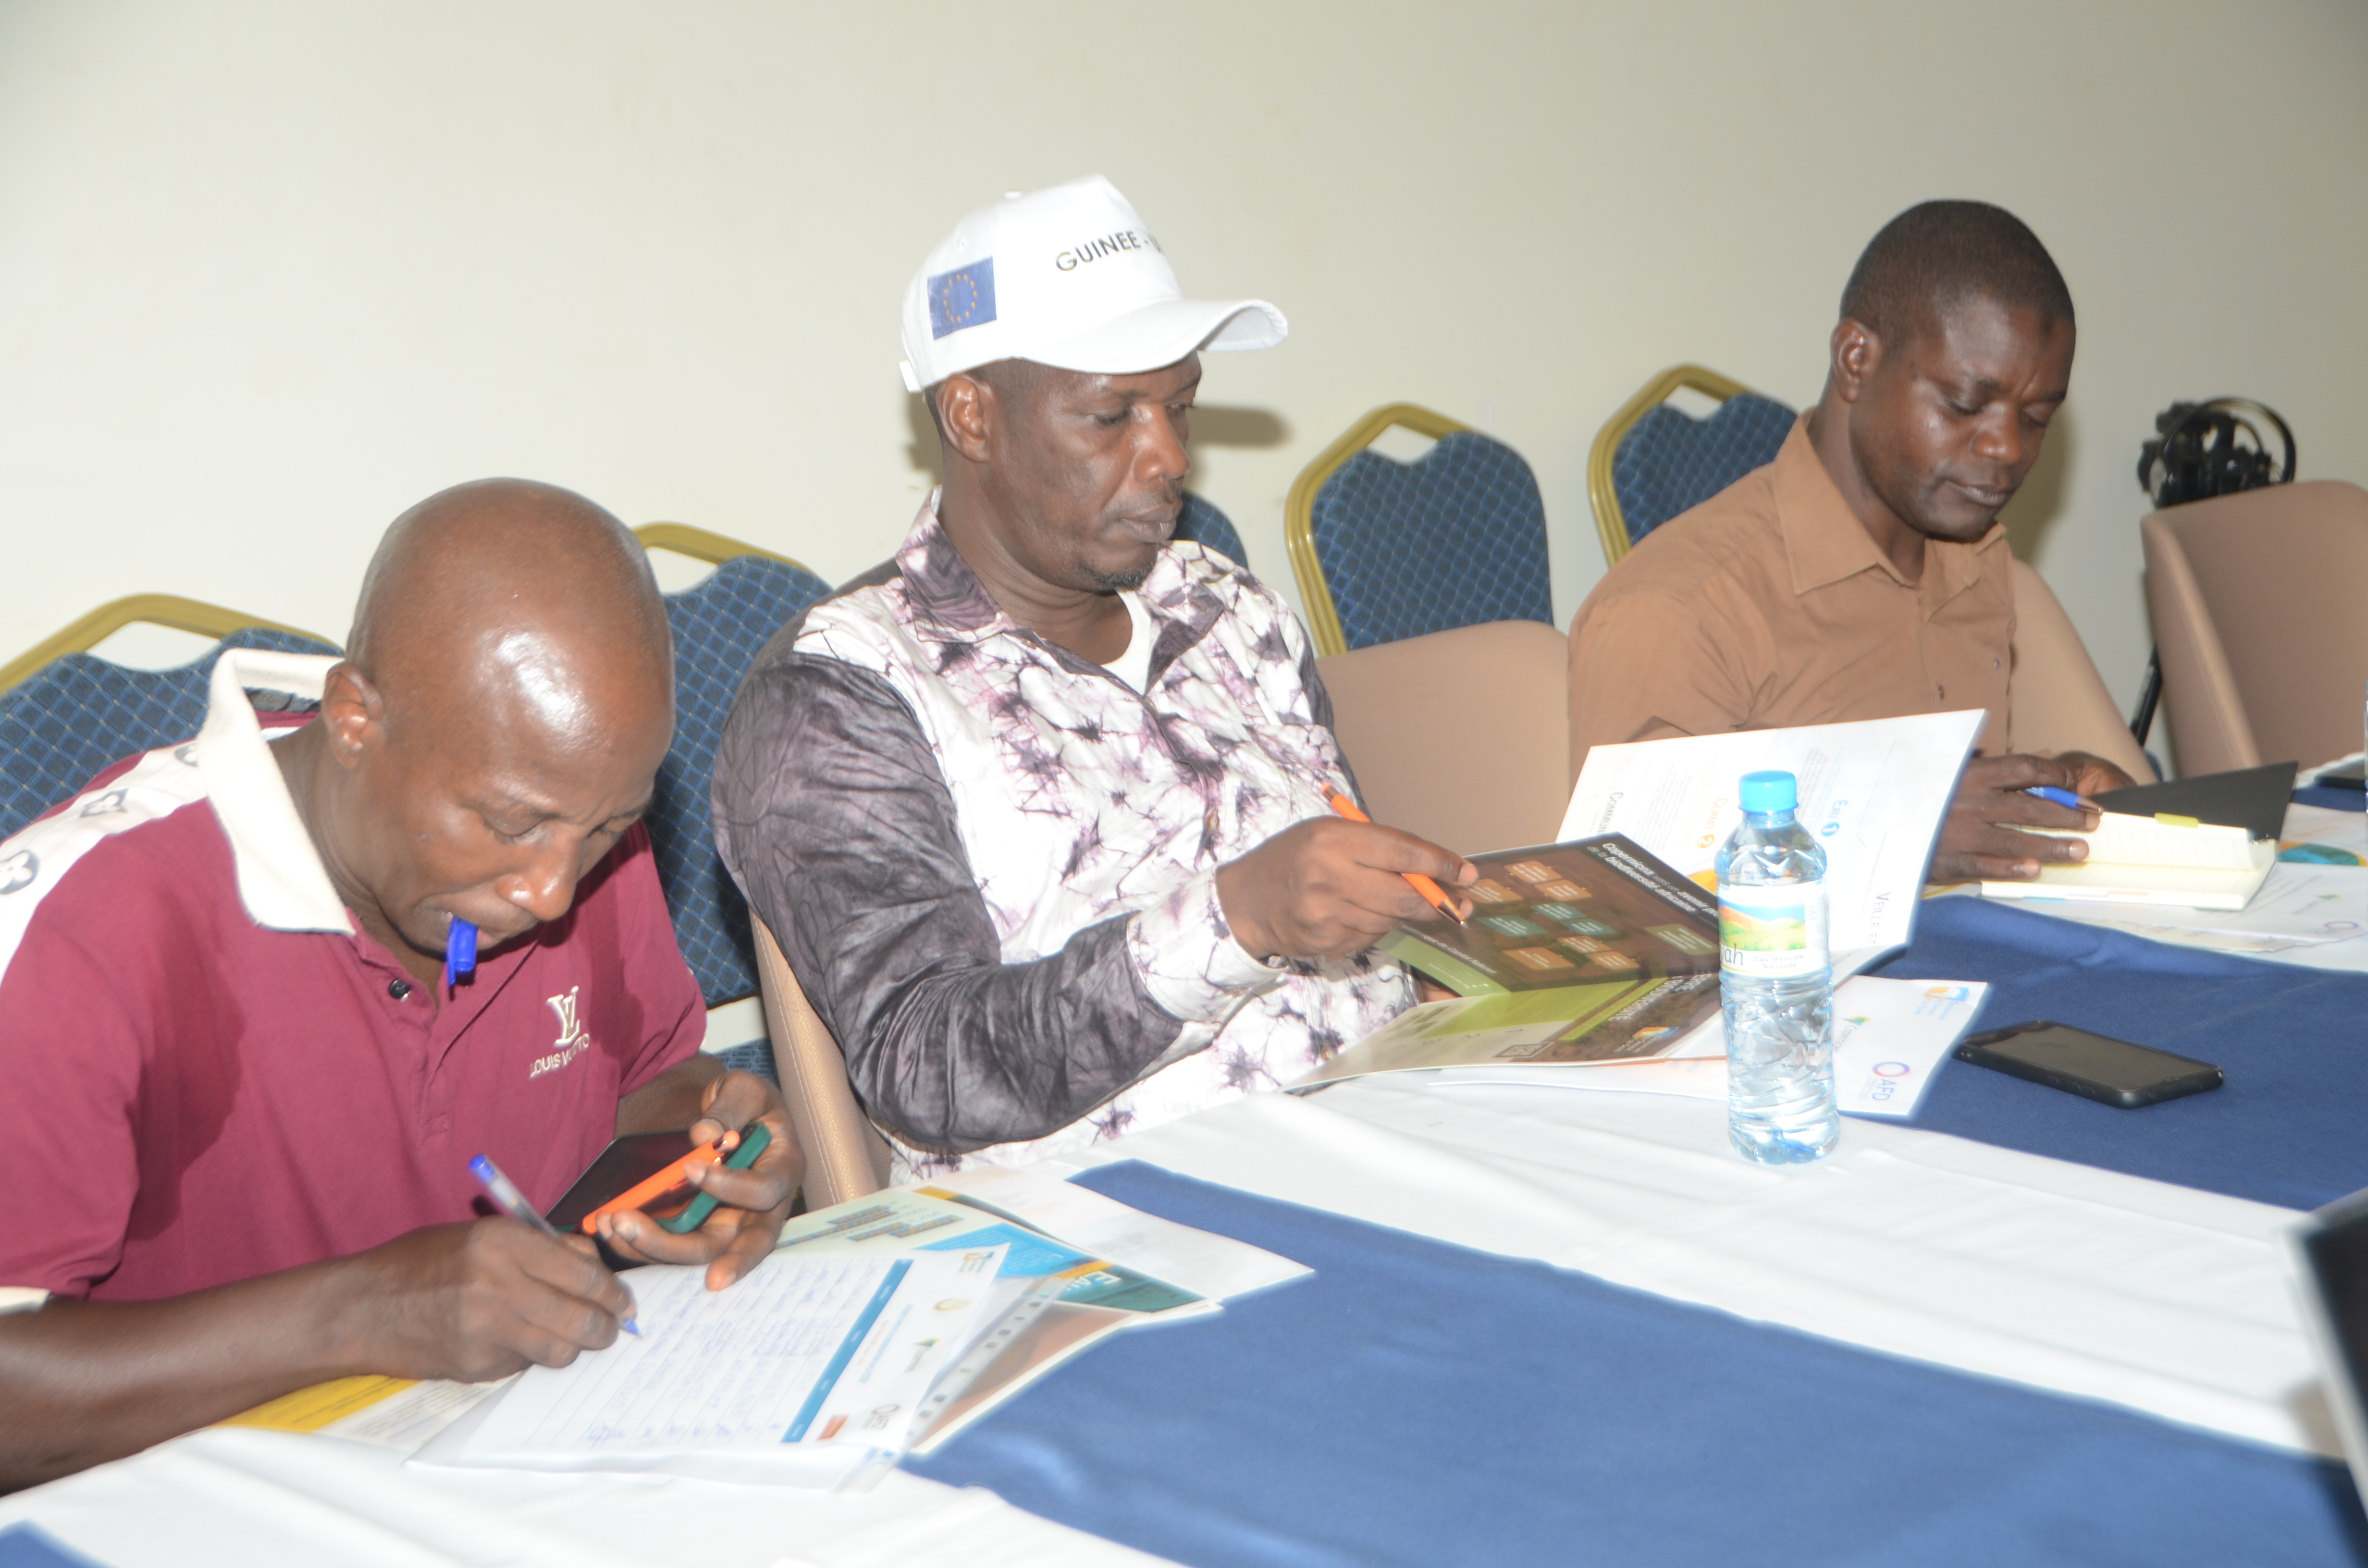 National awareness and training workshop on ENCA in Conakry